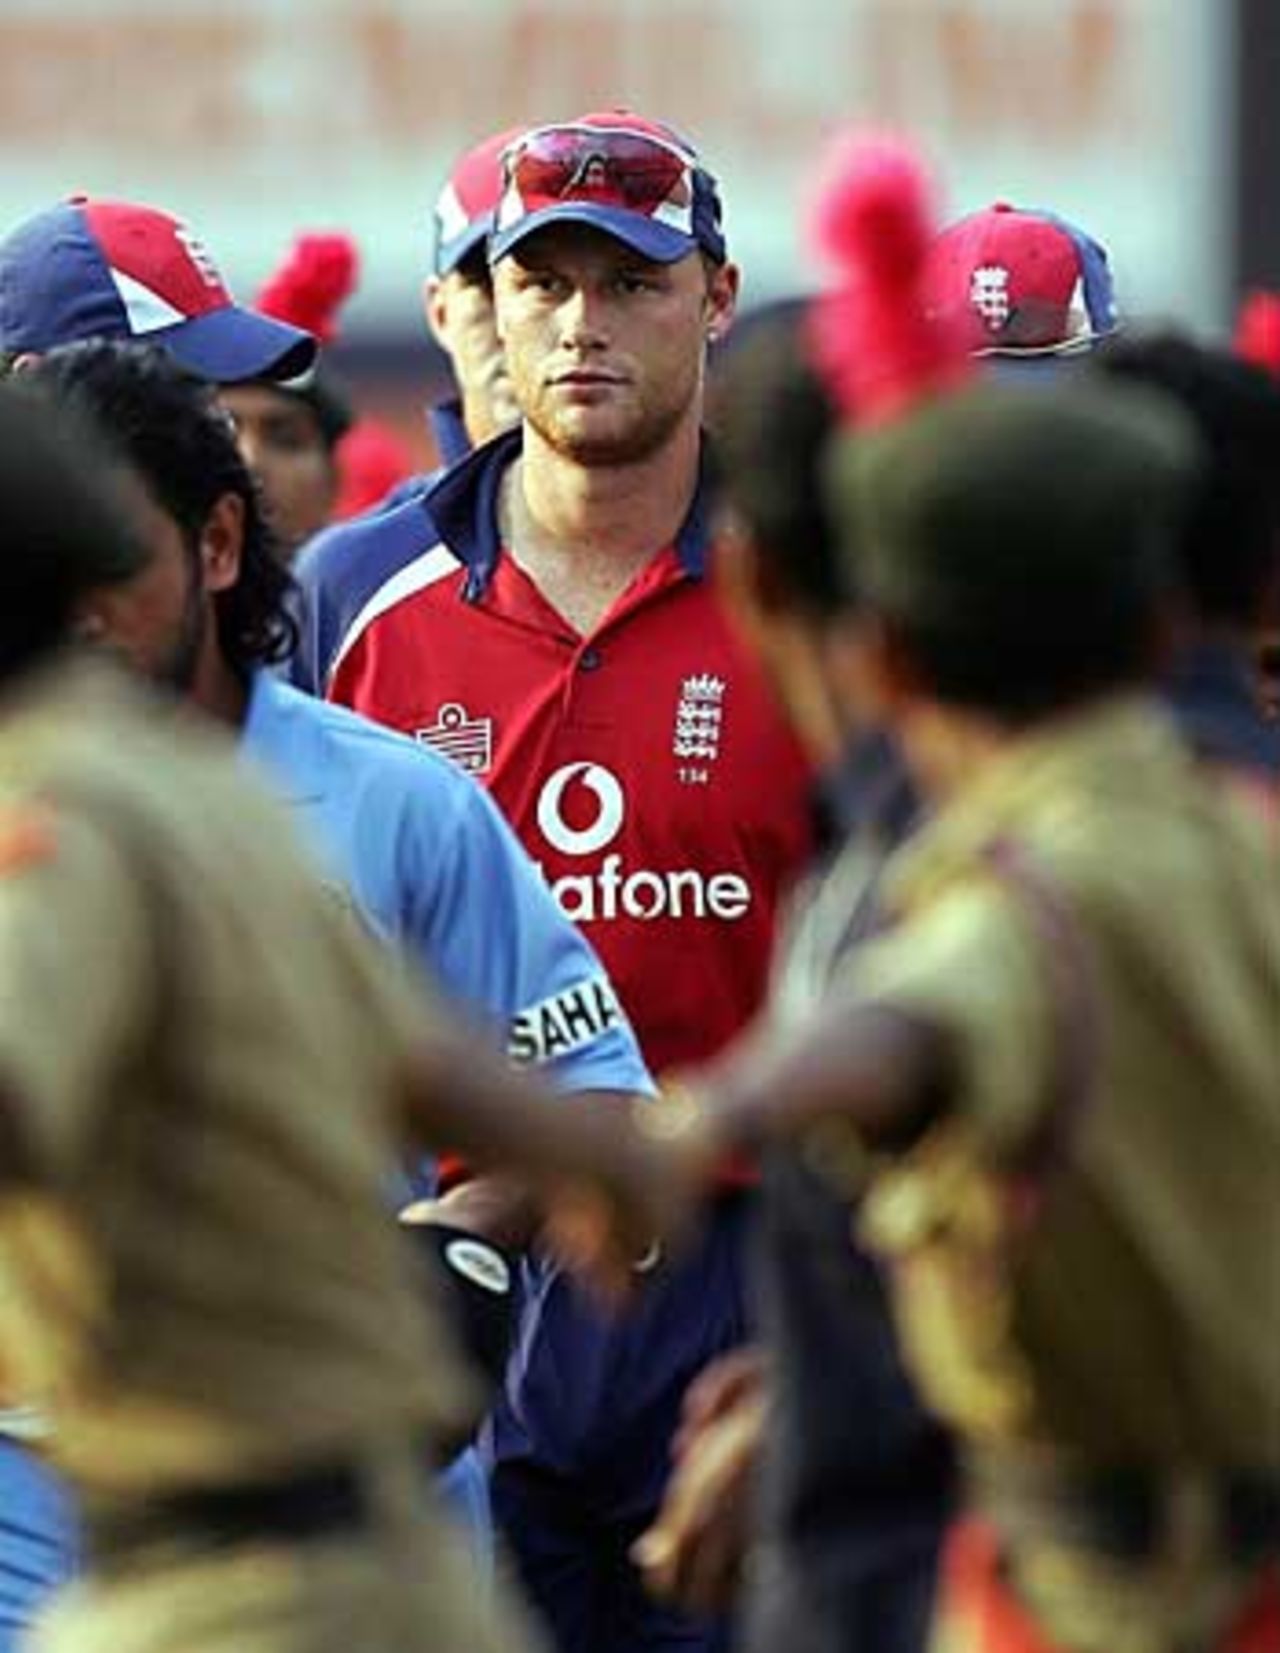 A glum-looking Andrew Flintoff makes his way off the pitch after England lost another one-dayer, India v England, 4th ODI, Kochi, April 6 2006